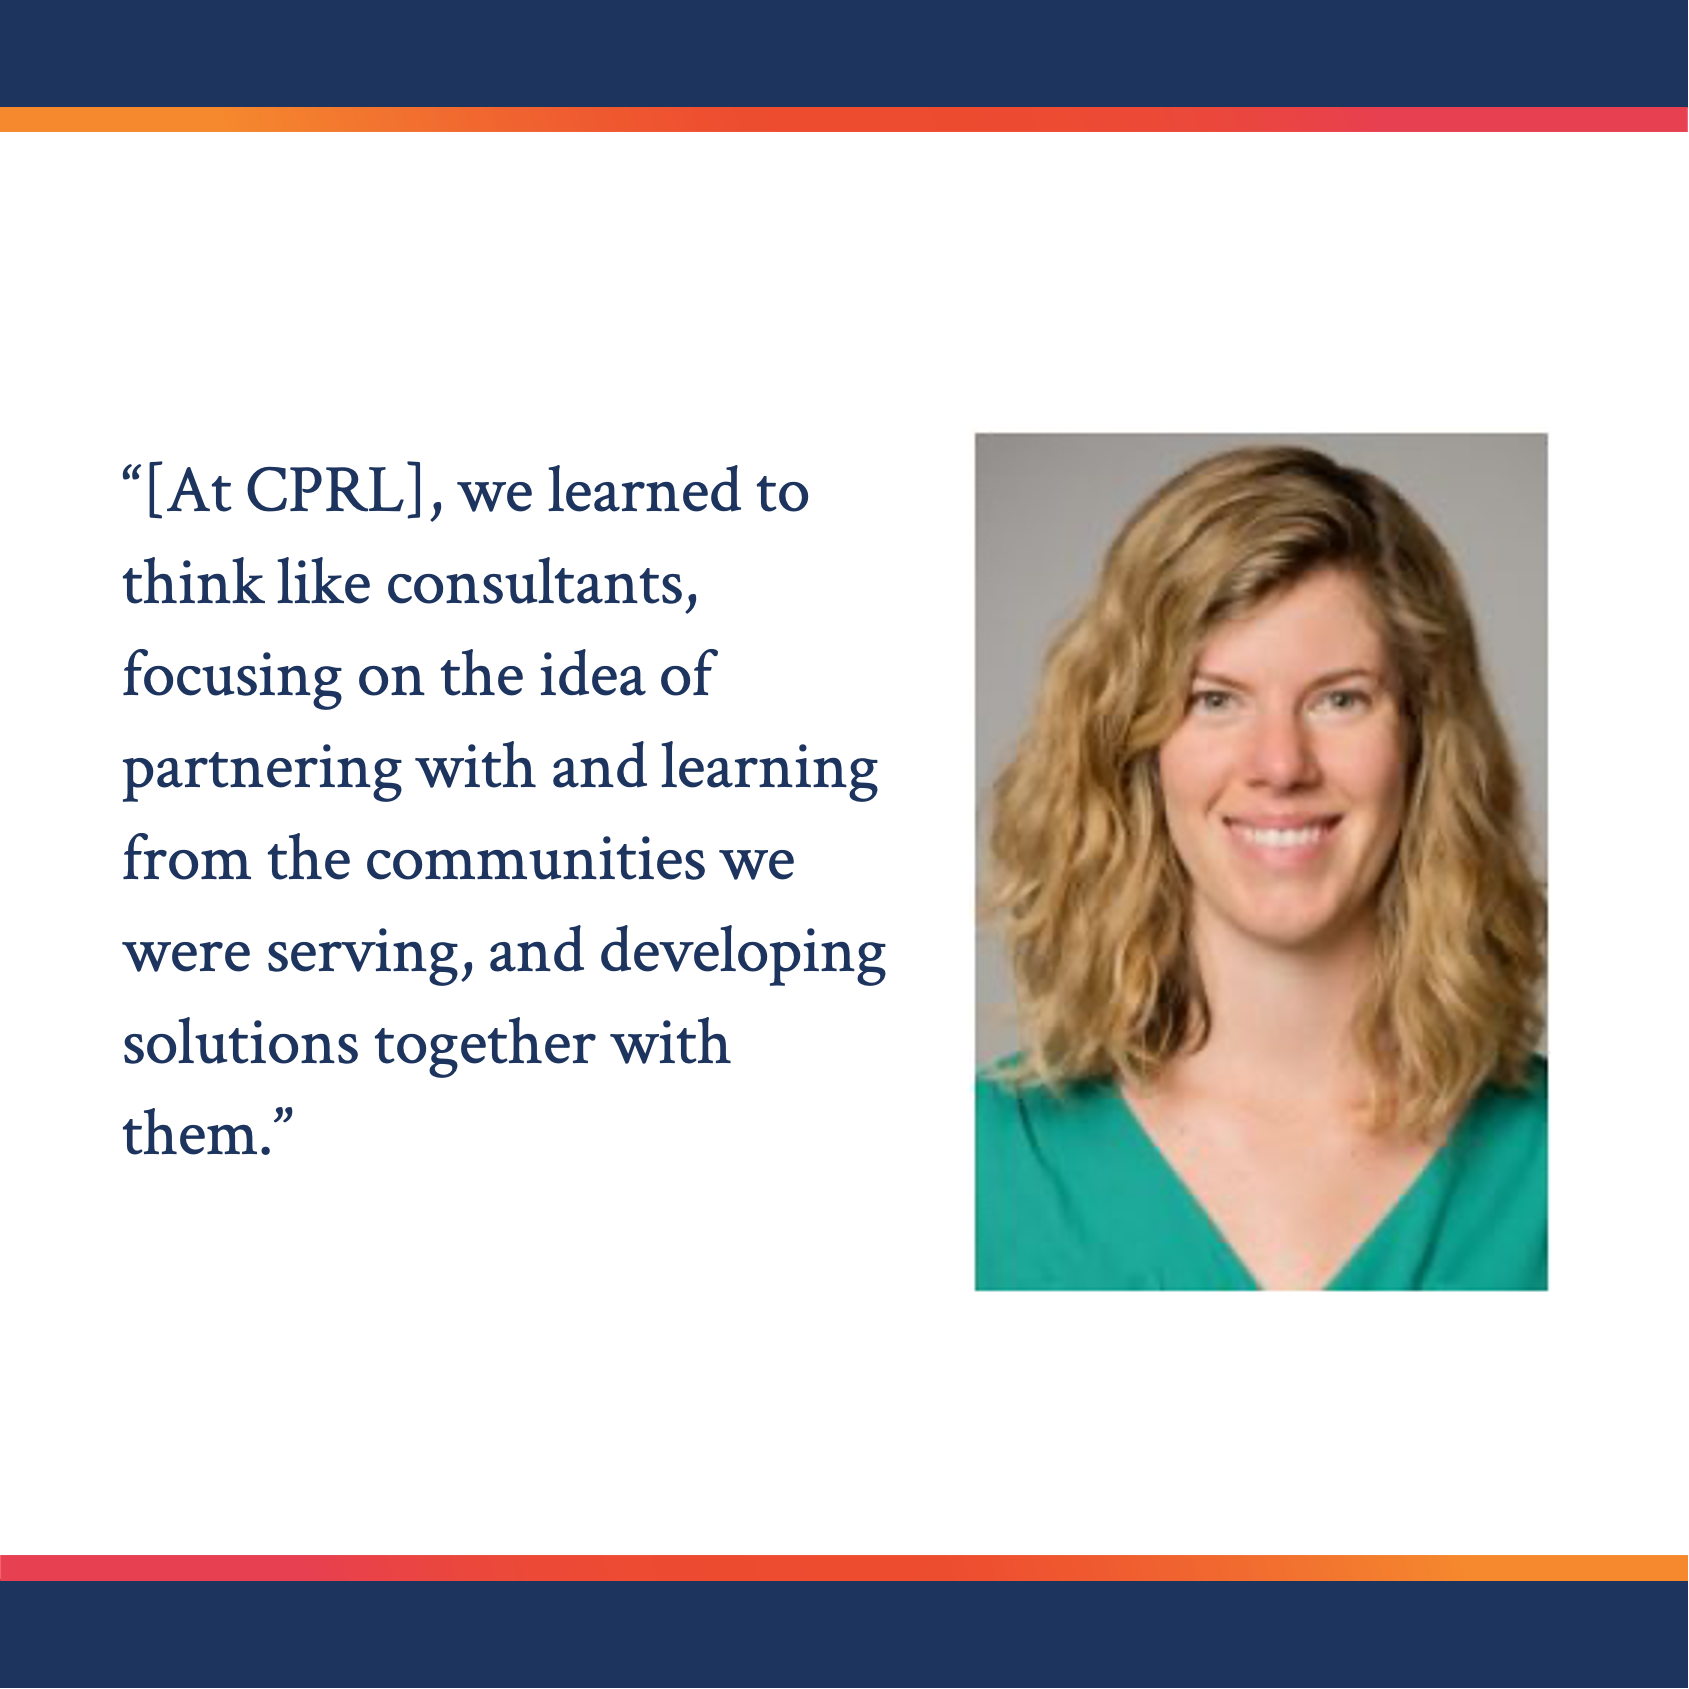 Headsot of Joanna Powell, who is profiled in the article, with a quote that reads, “[At CPRL], we learned to think like consultants, focusing on the idea of partnering with and learning from the communities we were serving, and developing solutions together with them.”